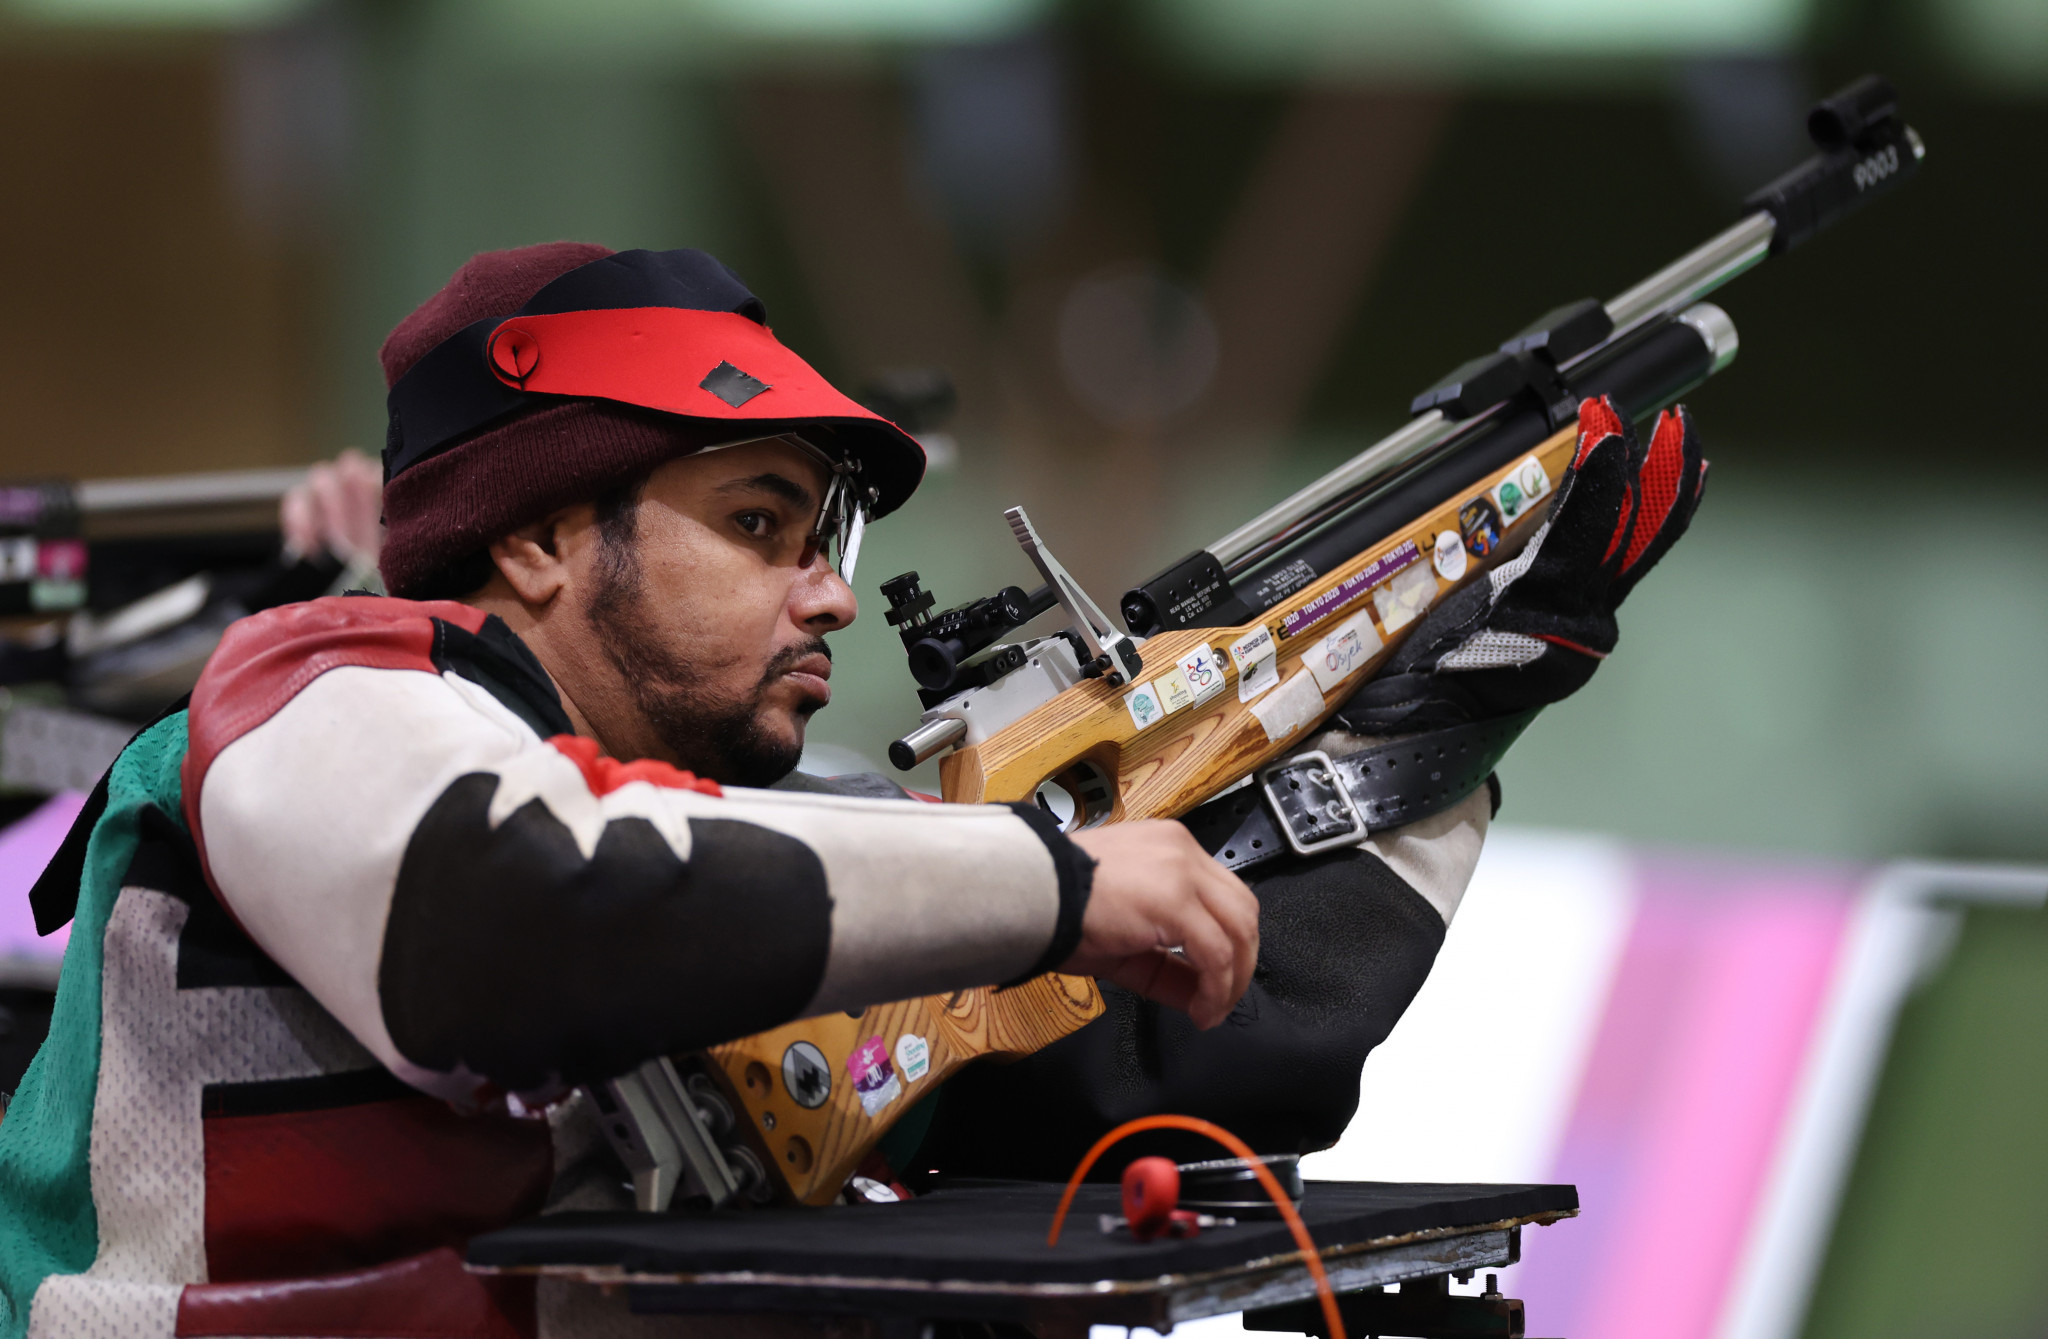 Abdulla Sultan Alaryani will be hoping to take gold for the hosts ©Getty Images